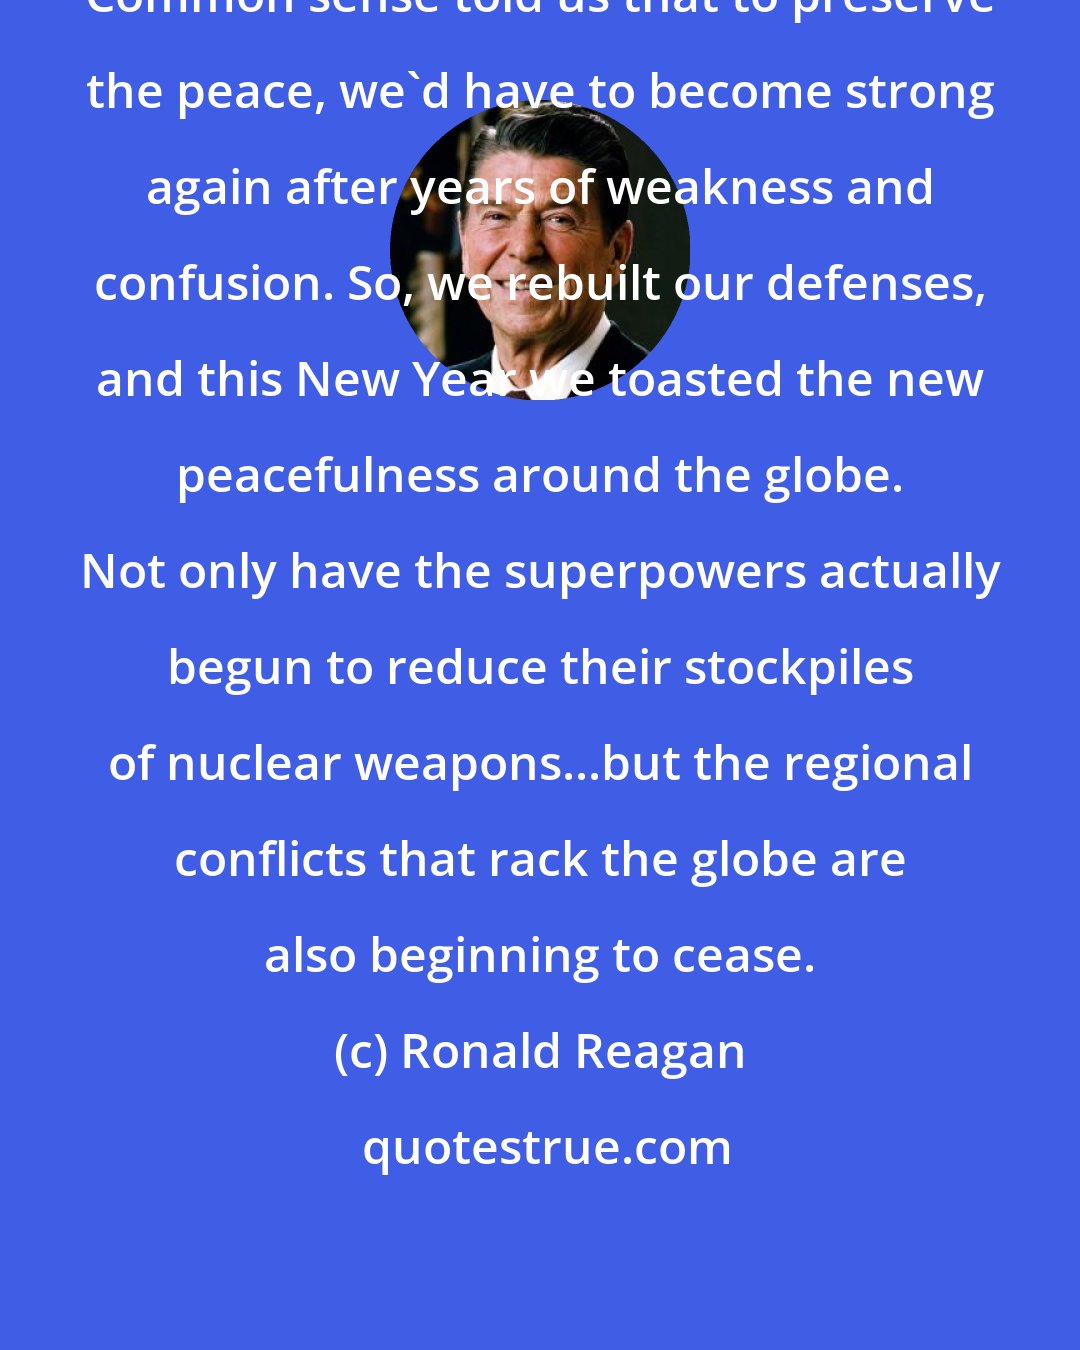 Ronald Reagan: Common sense told us that to preserve the peace, we'd have to become strong again after years of weakness and confusion. So, we rebuilt our defenses, and this New Year we toasted the new peacefulness around the globe. Not only have the superpowers actually begun to reduce their stockpiles of nuclear weapons...but the regional conflicts that rack the globe are also beginning to cease.